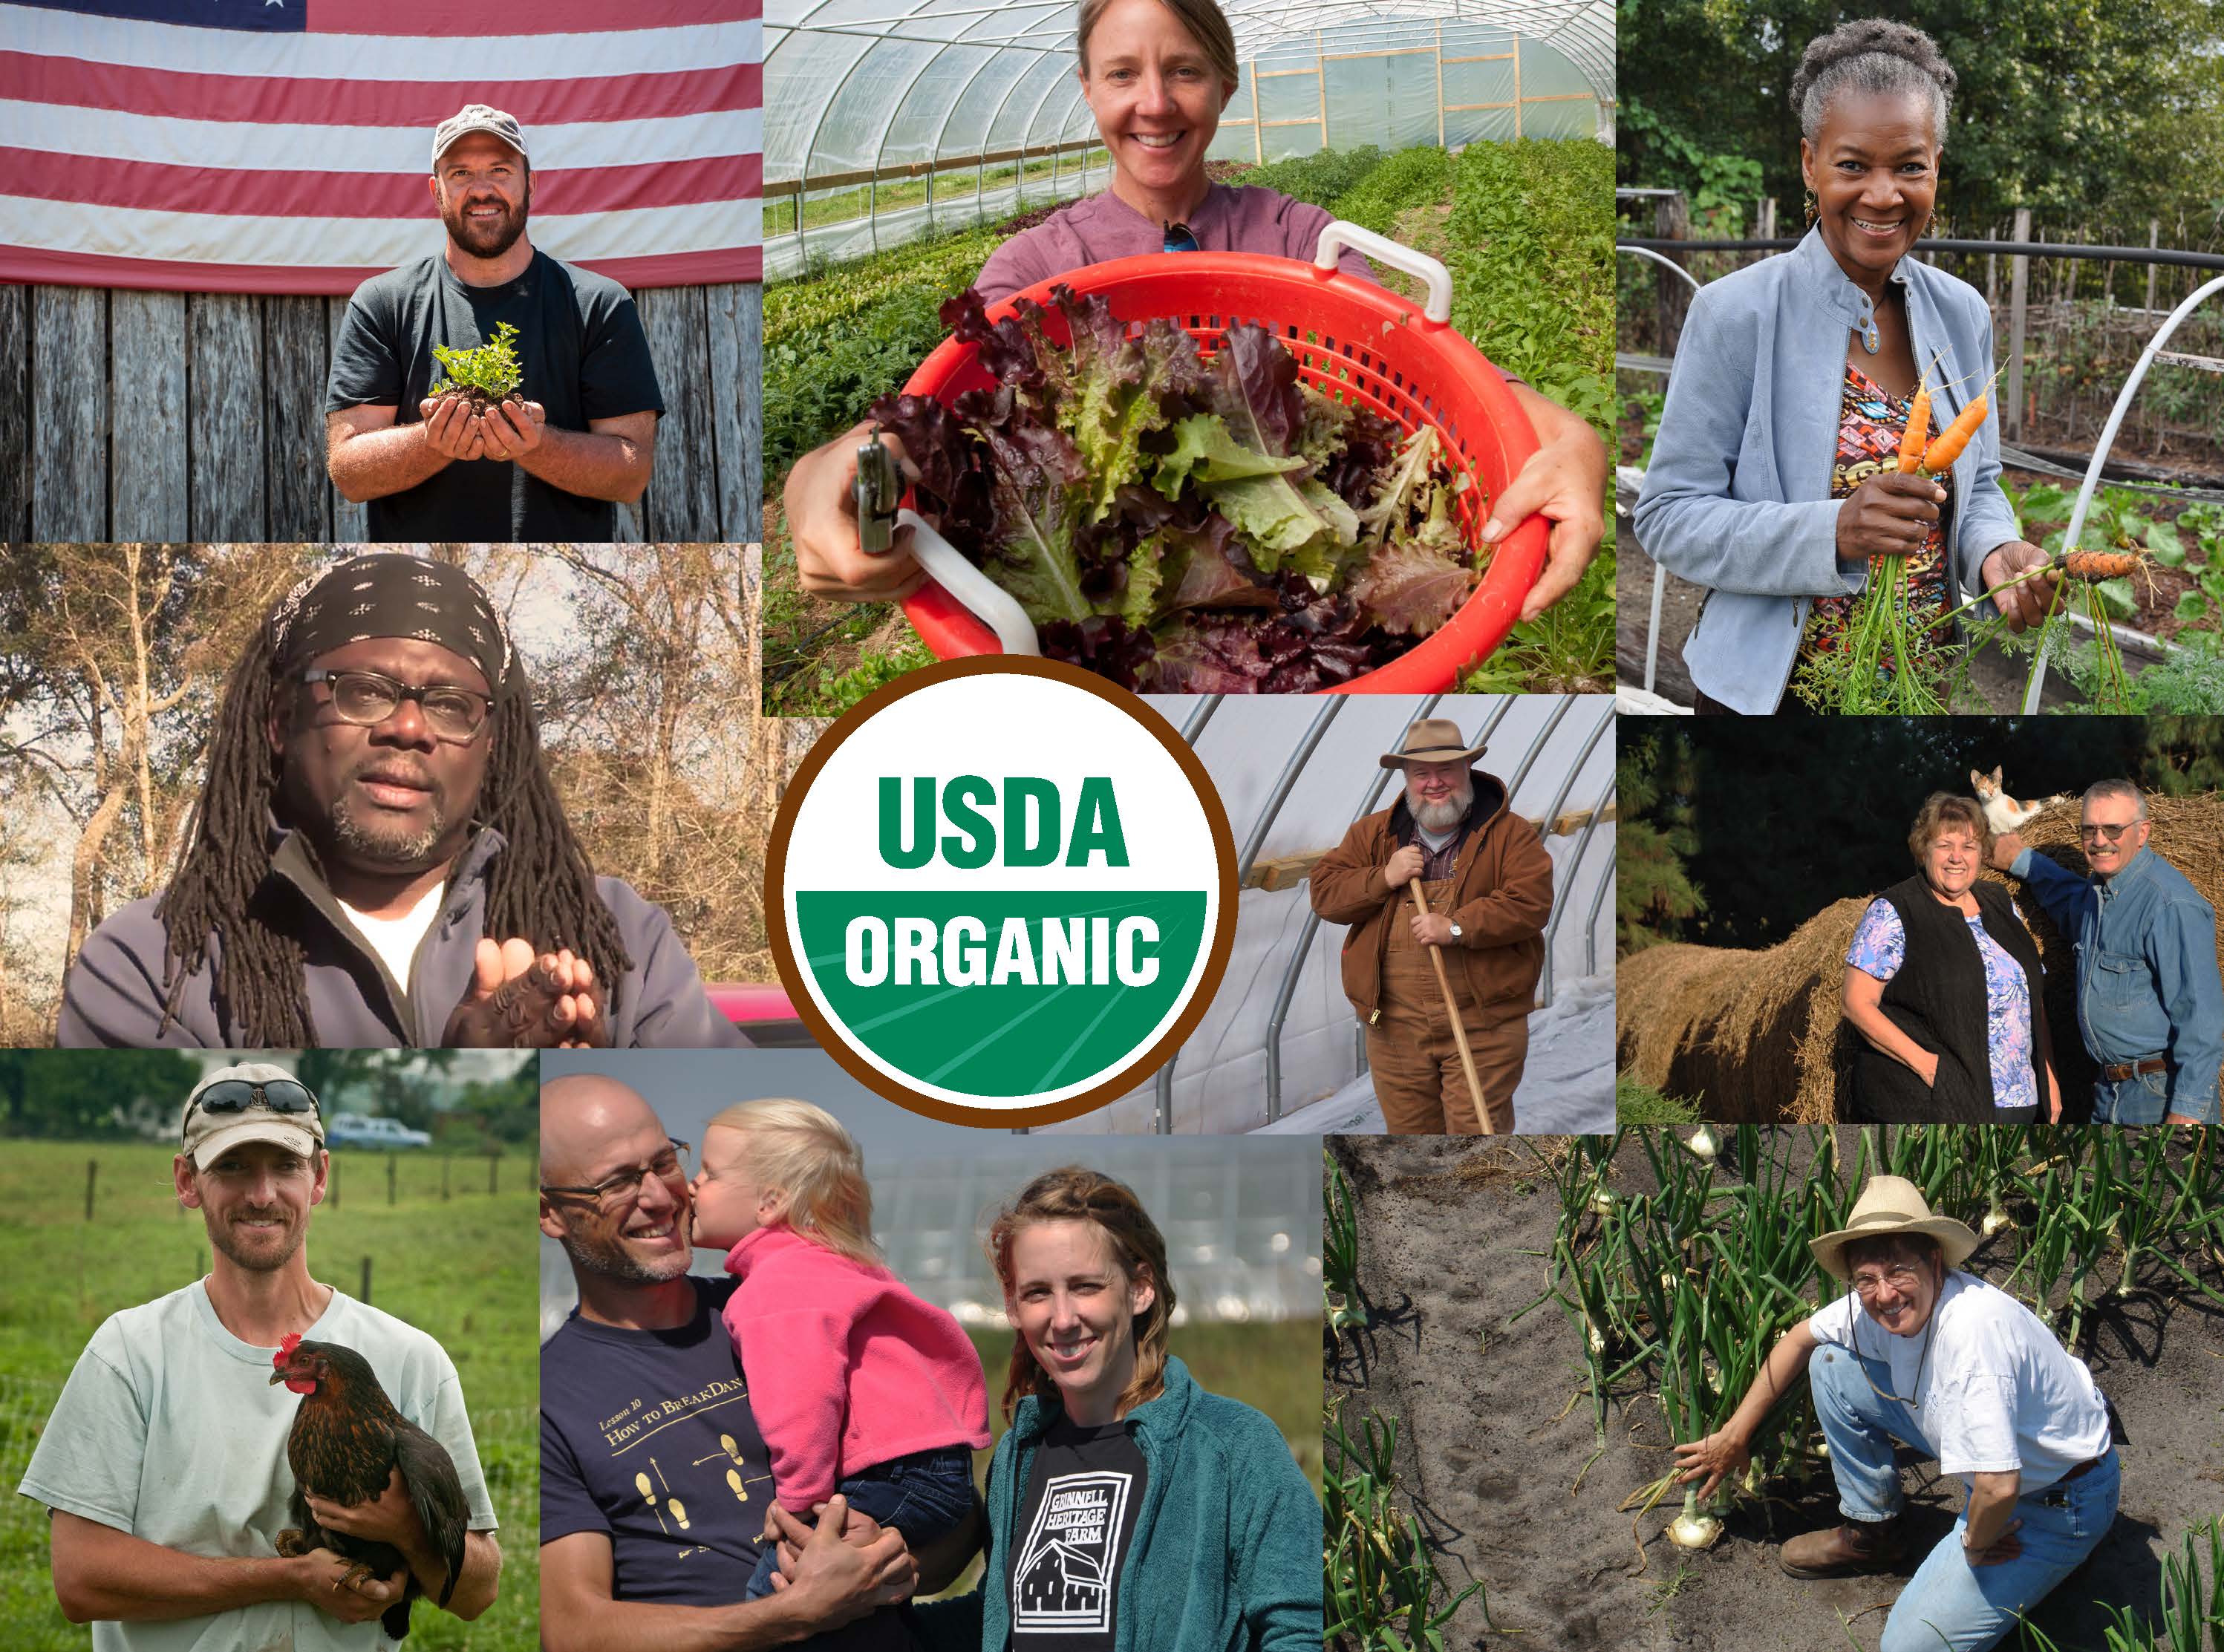 The National Organic Program: Protecting the Integrity of Organic Agriculture